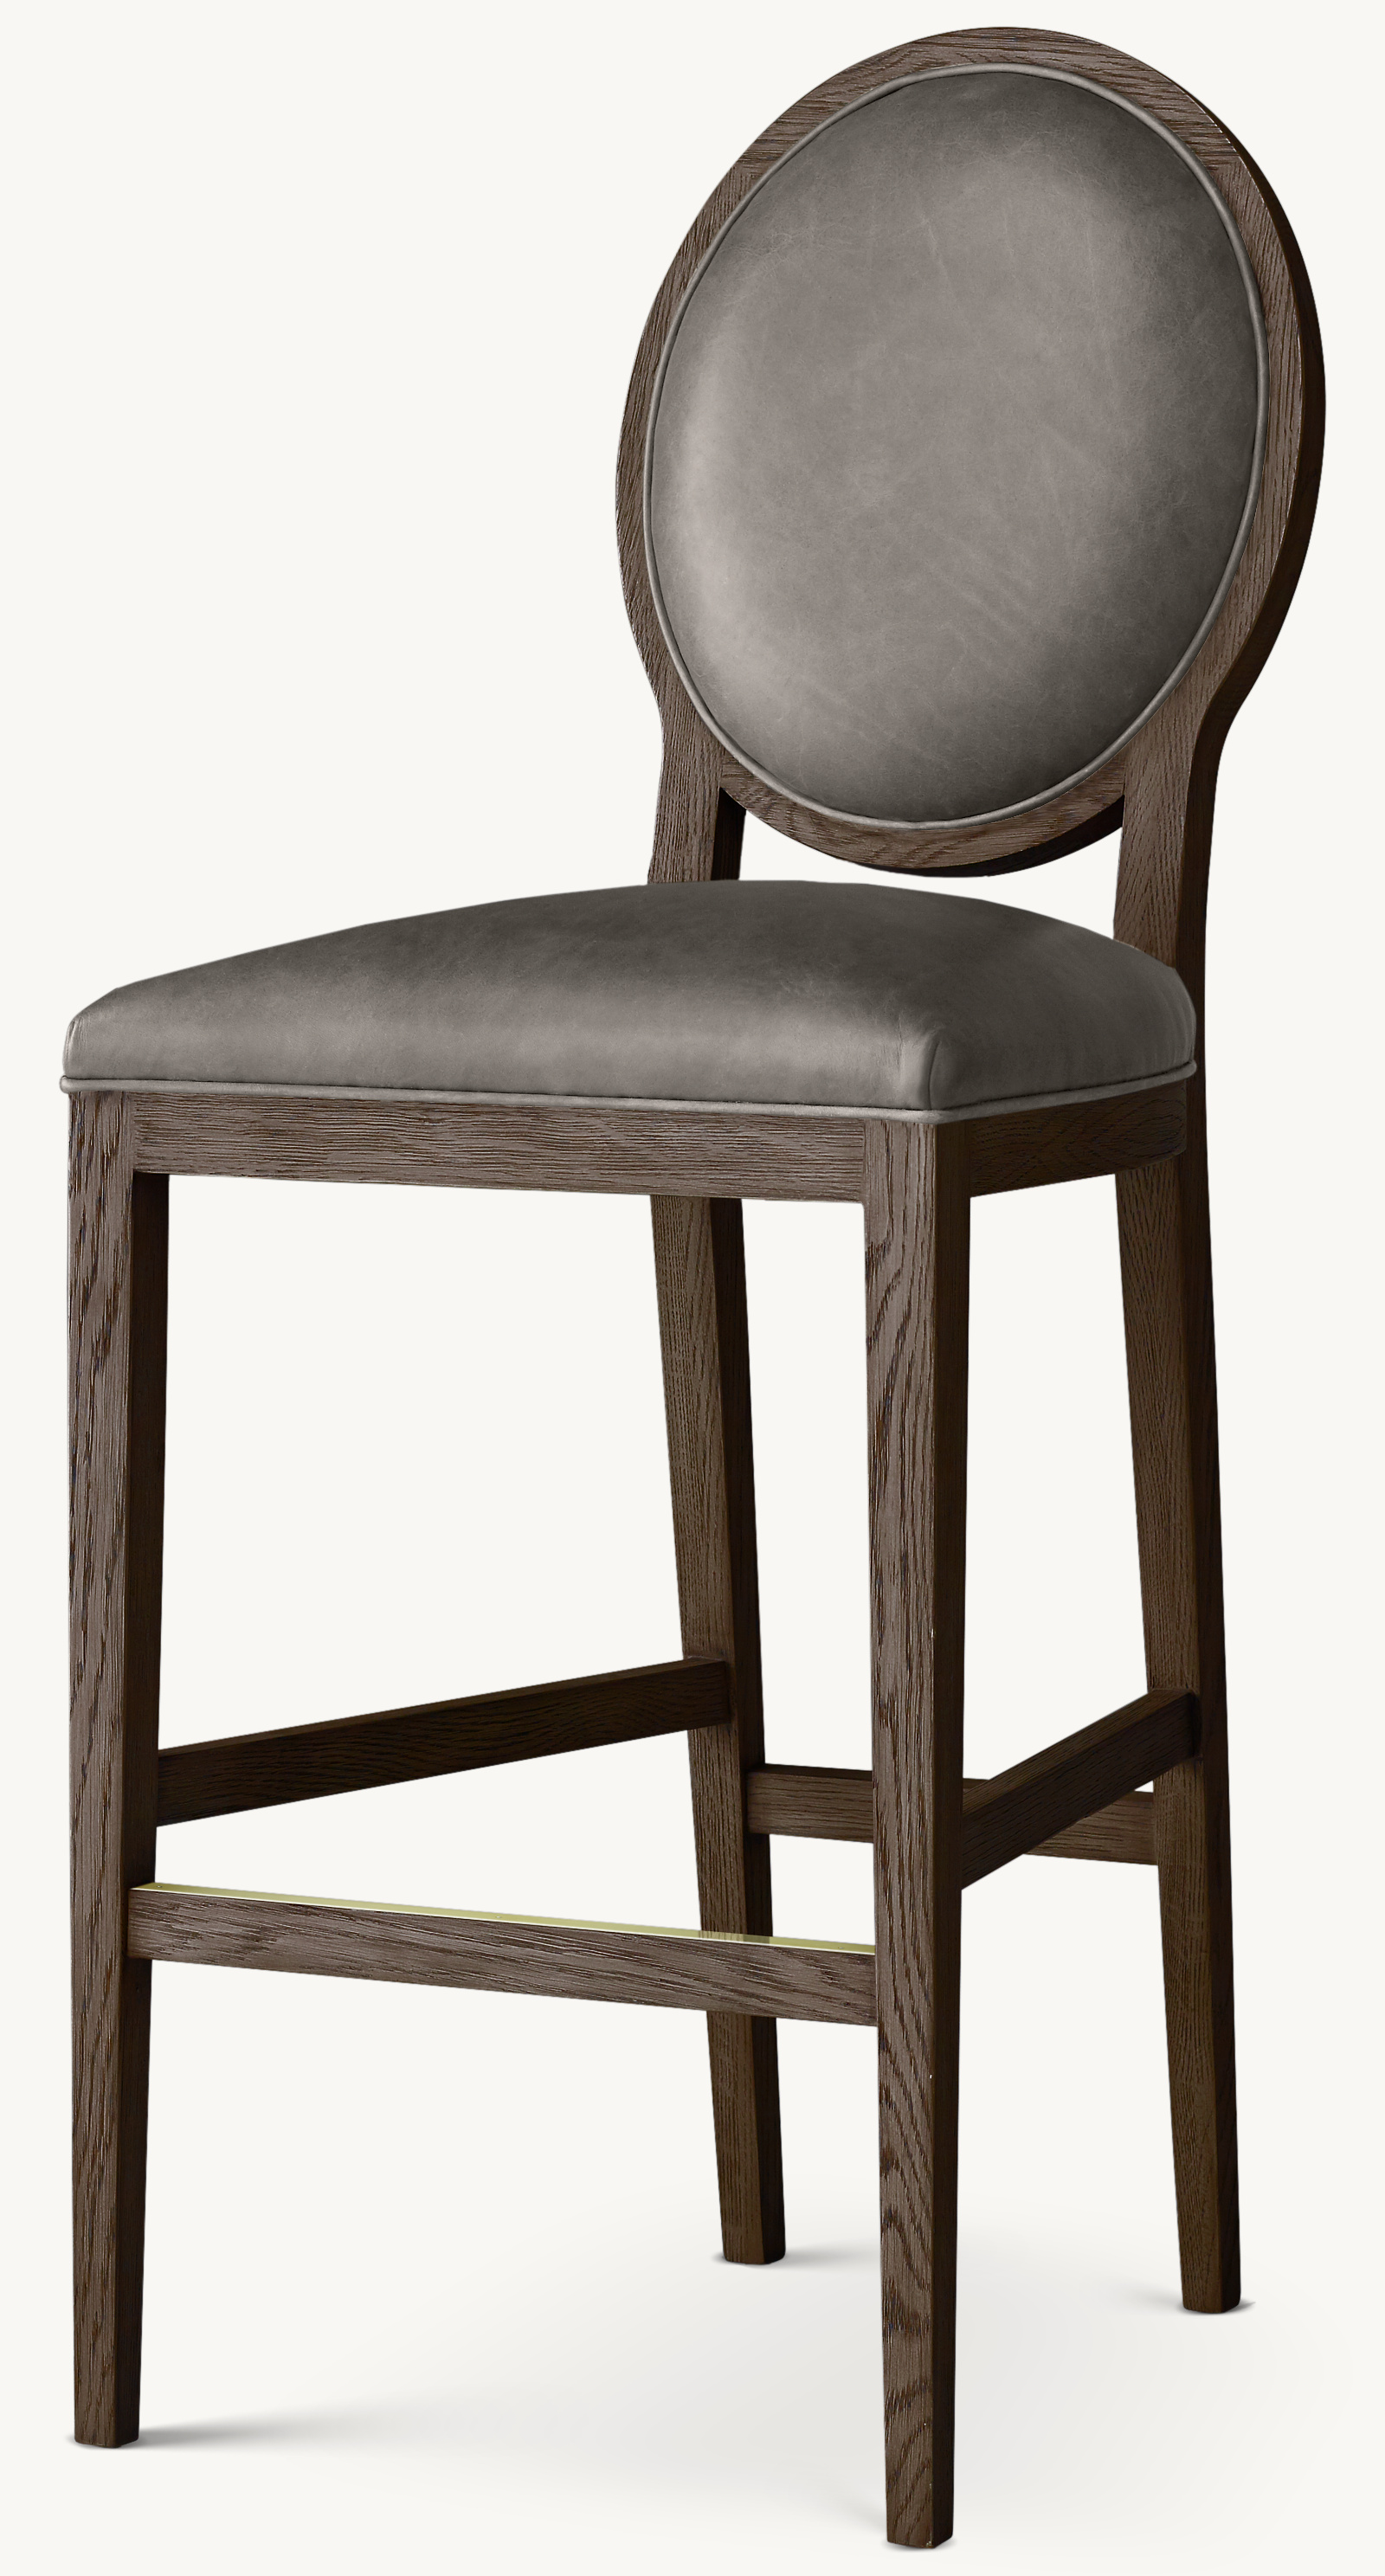 Shown in Italian Berkshire Pewter with Brown Oak finish.